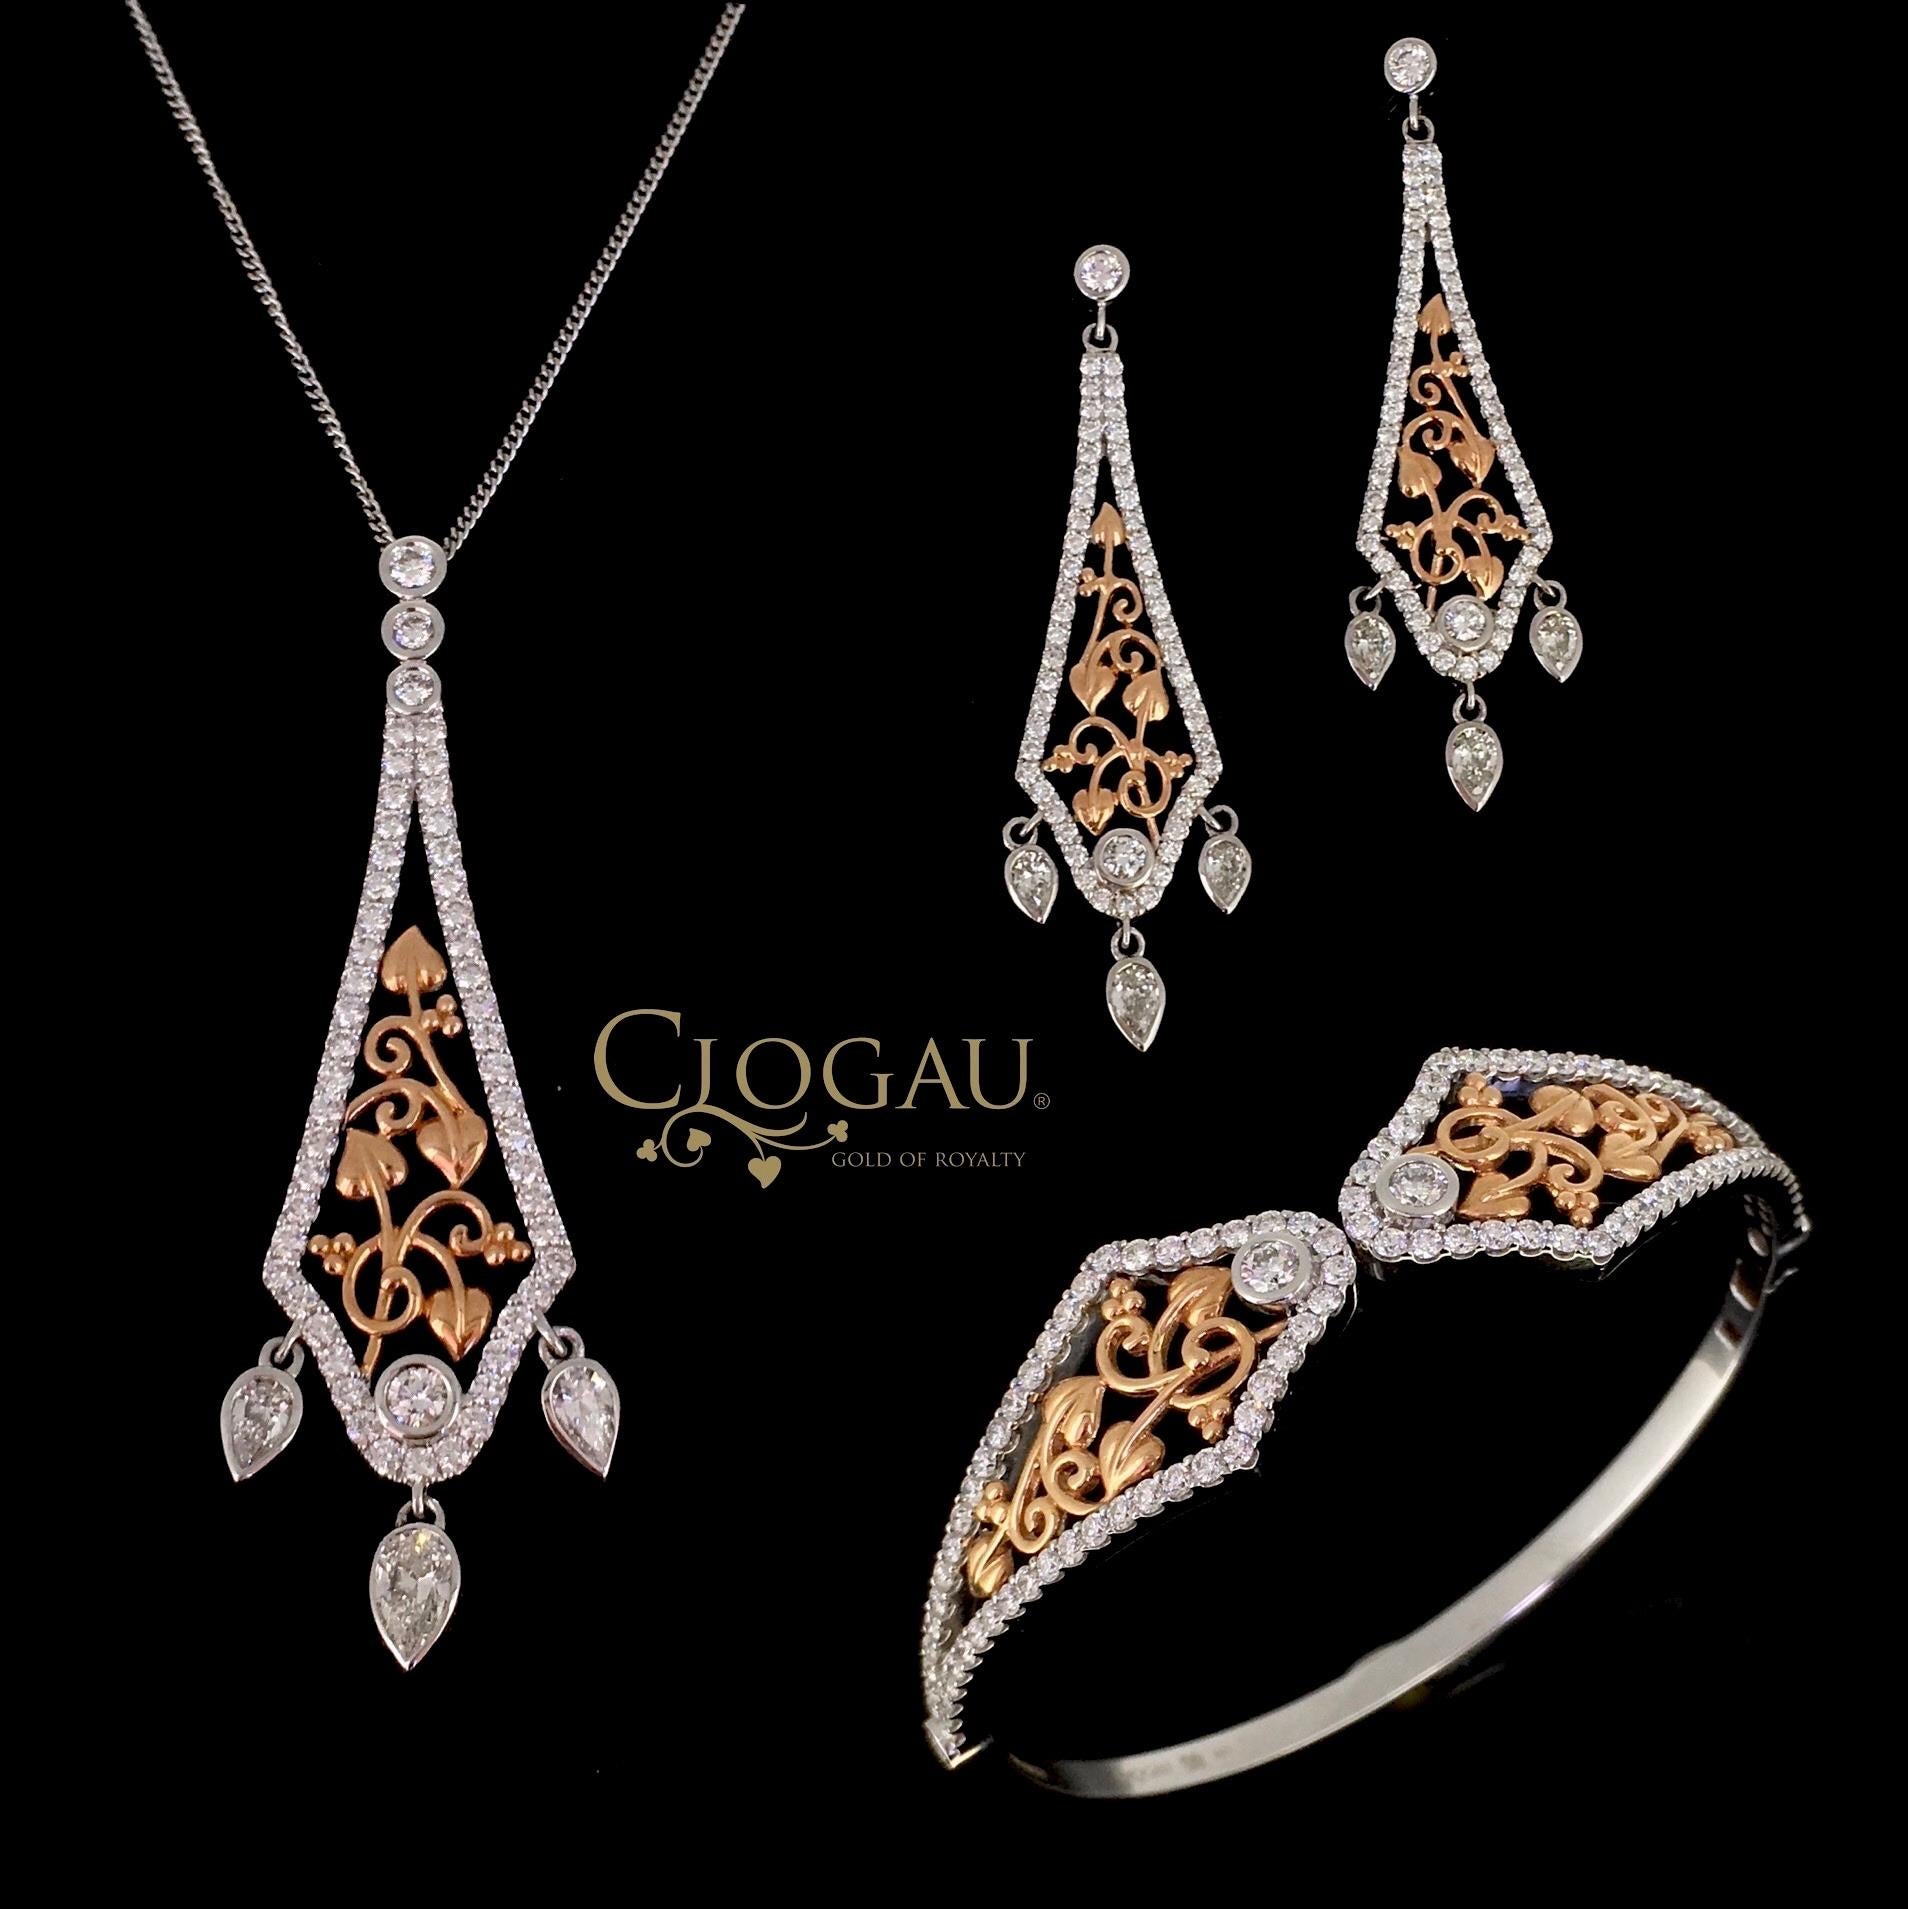 This beautiful set consists of a bangle, a pair of earrings and a pendant necklace. It is part of the Gold of Royalty collection called “Debutante”. This collection was created in association with Historic Royal Palaces. Each piece contains Welsh